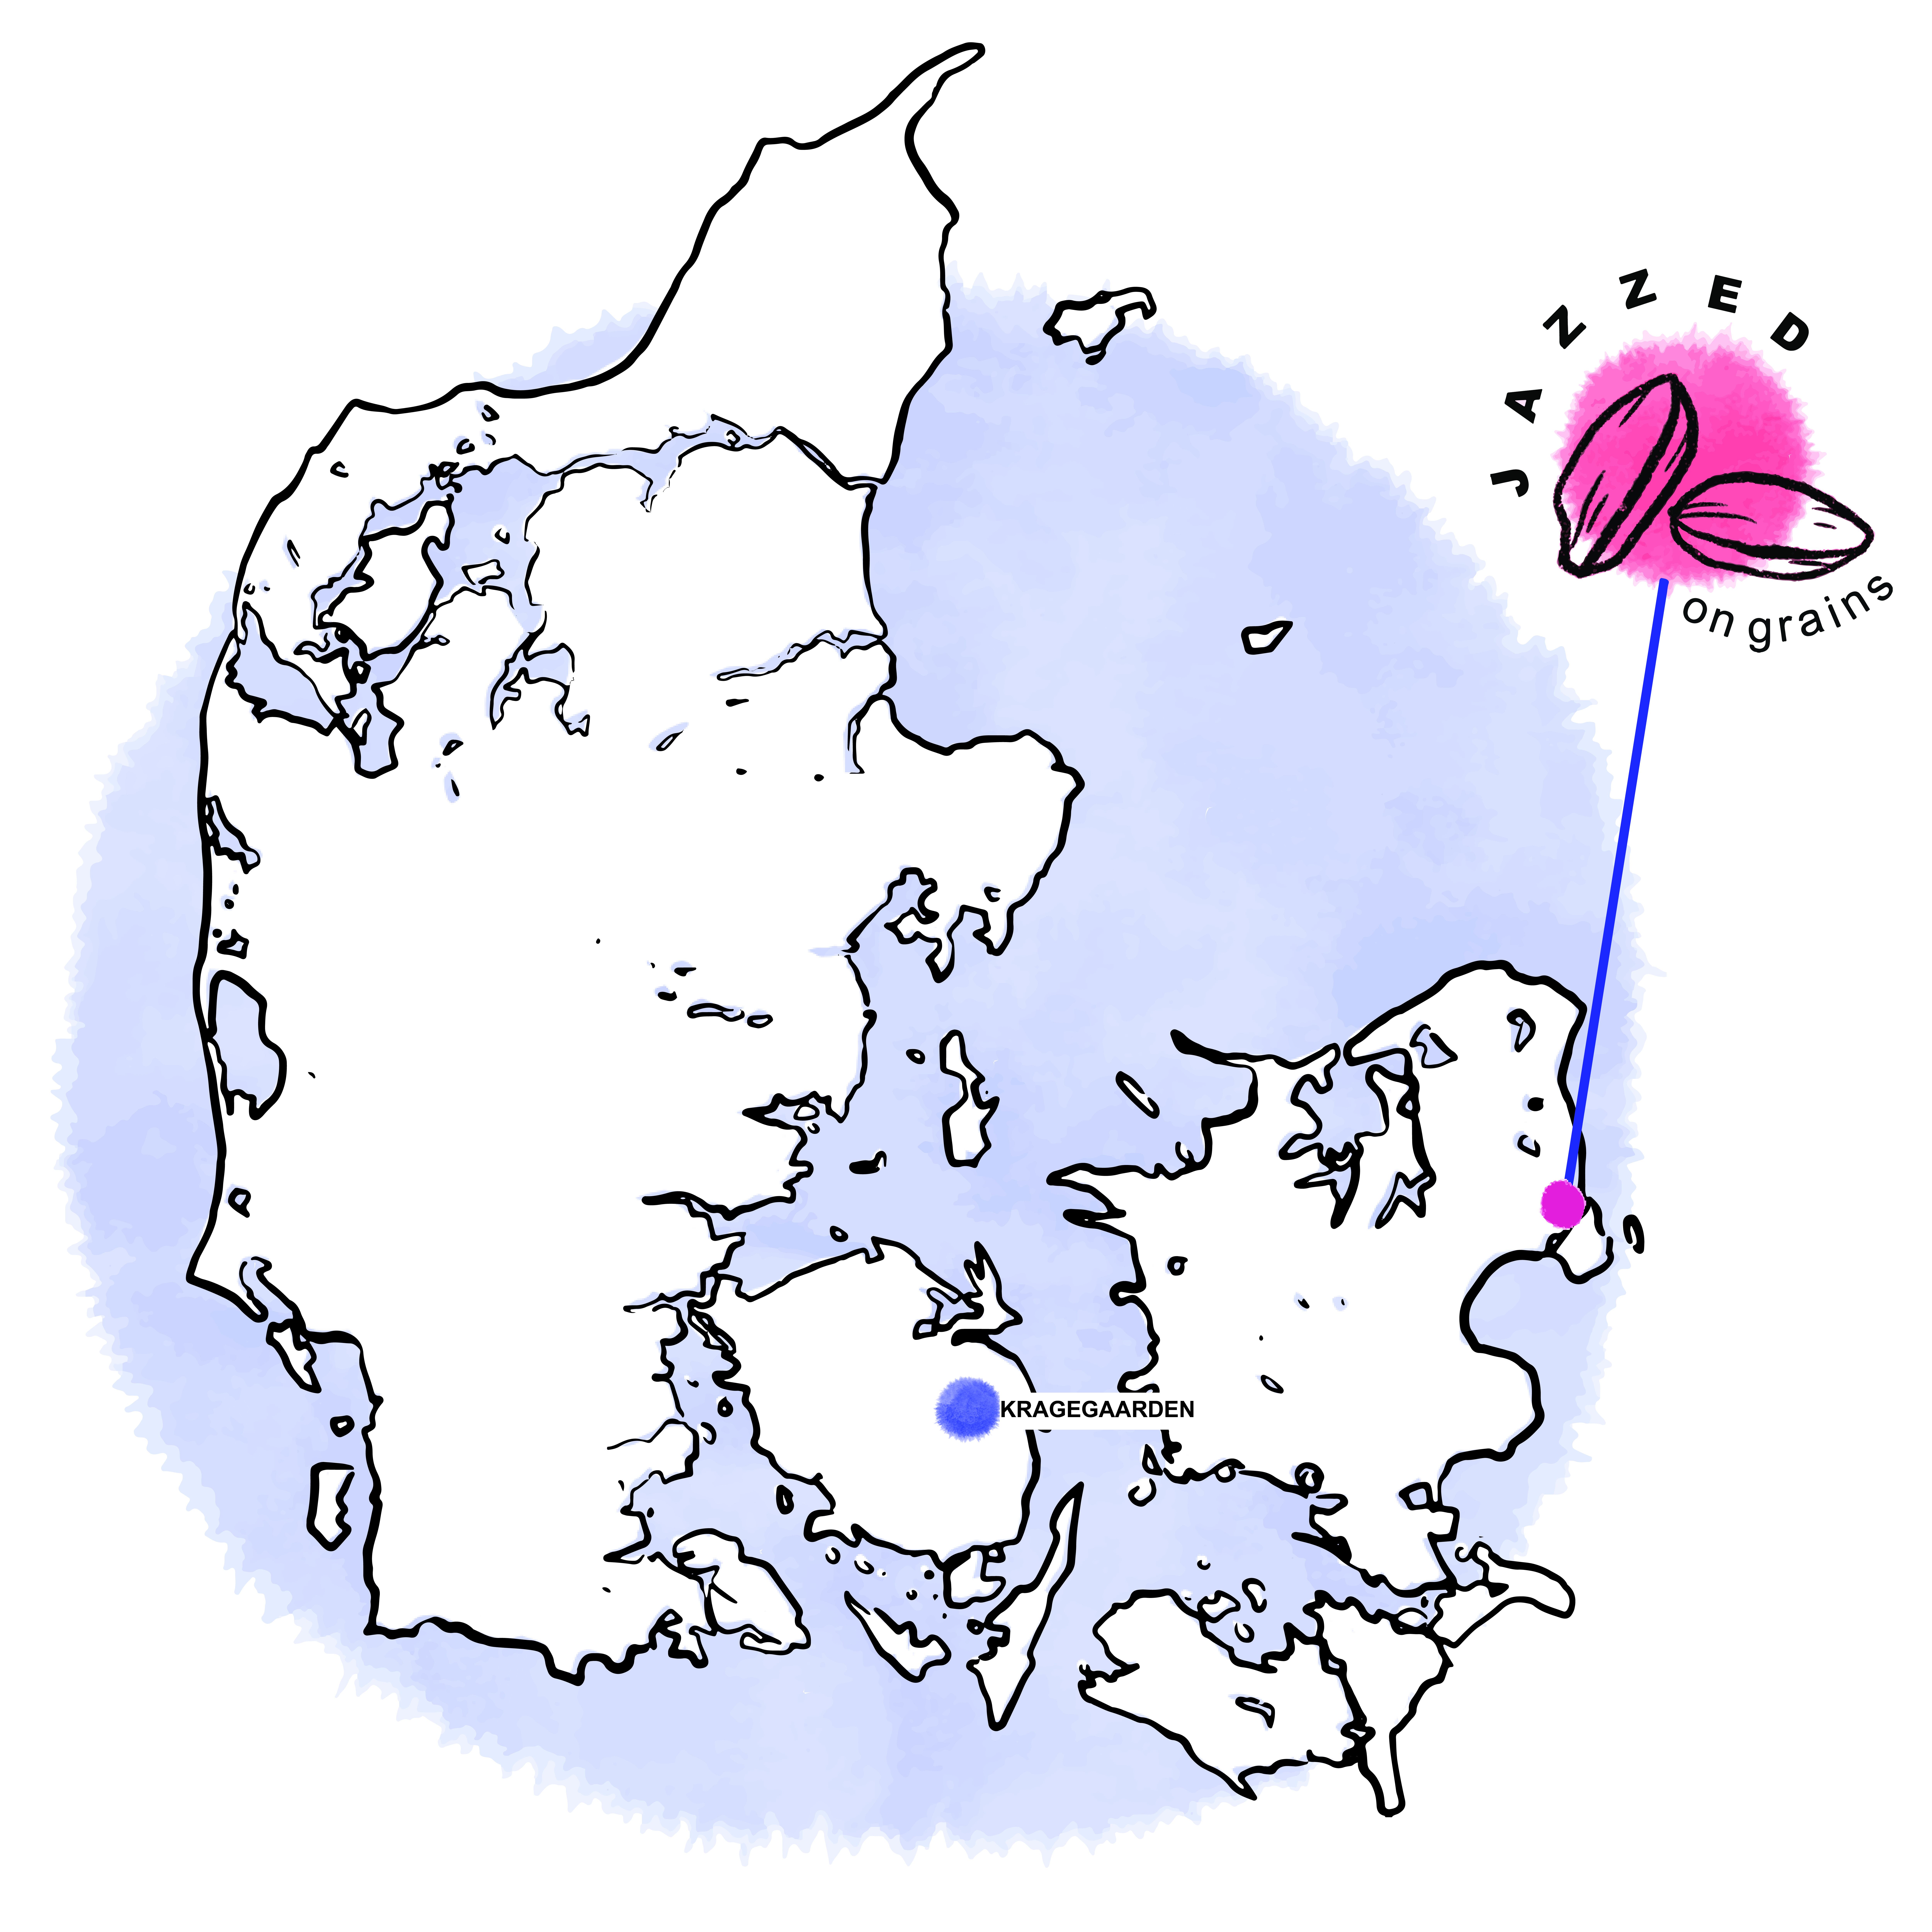 Map of Denmark with two spots marked, one on fyn and one in Copenhagen. The one in Copenhagen is Jazzed on Grains location, the one on Fyn is Kragegaarden.